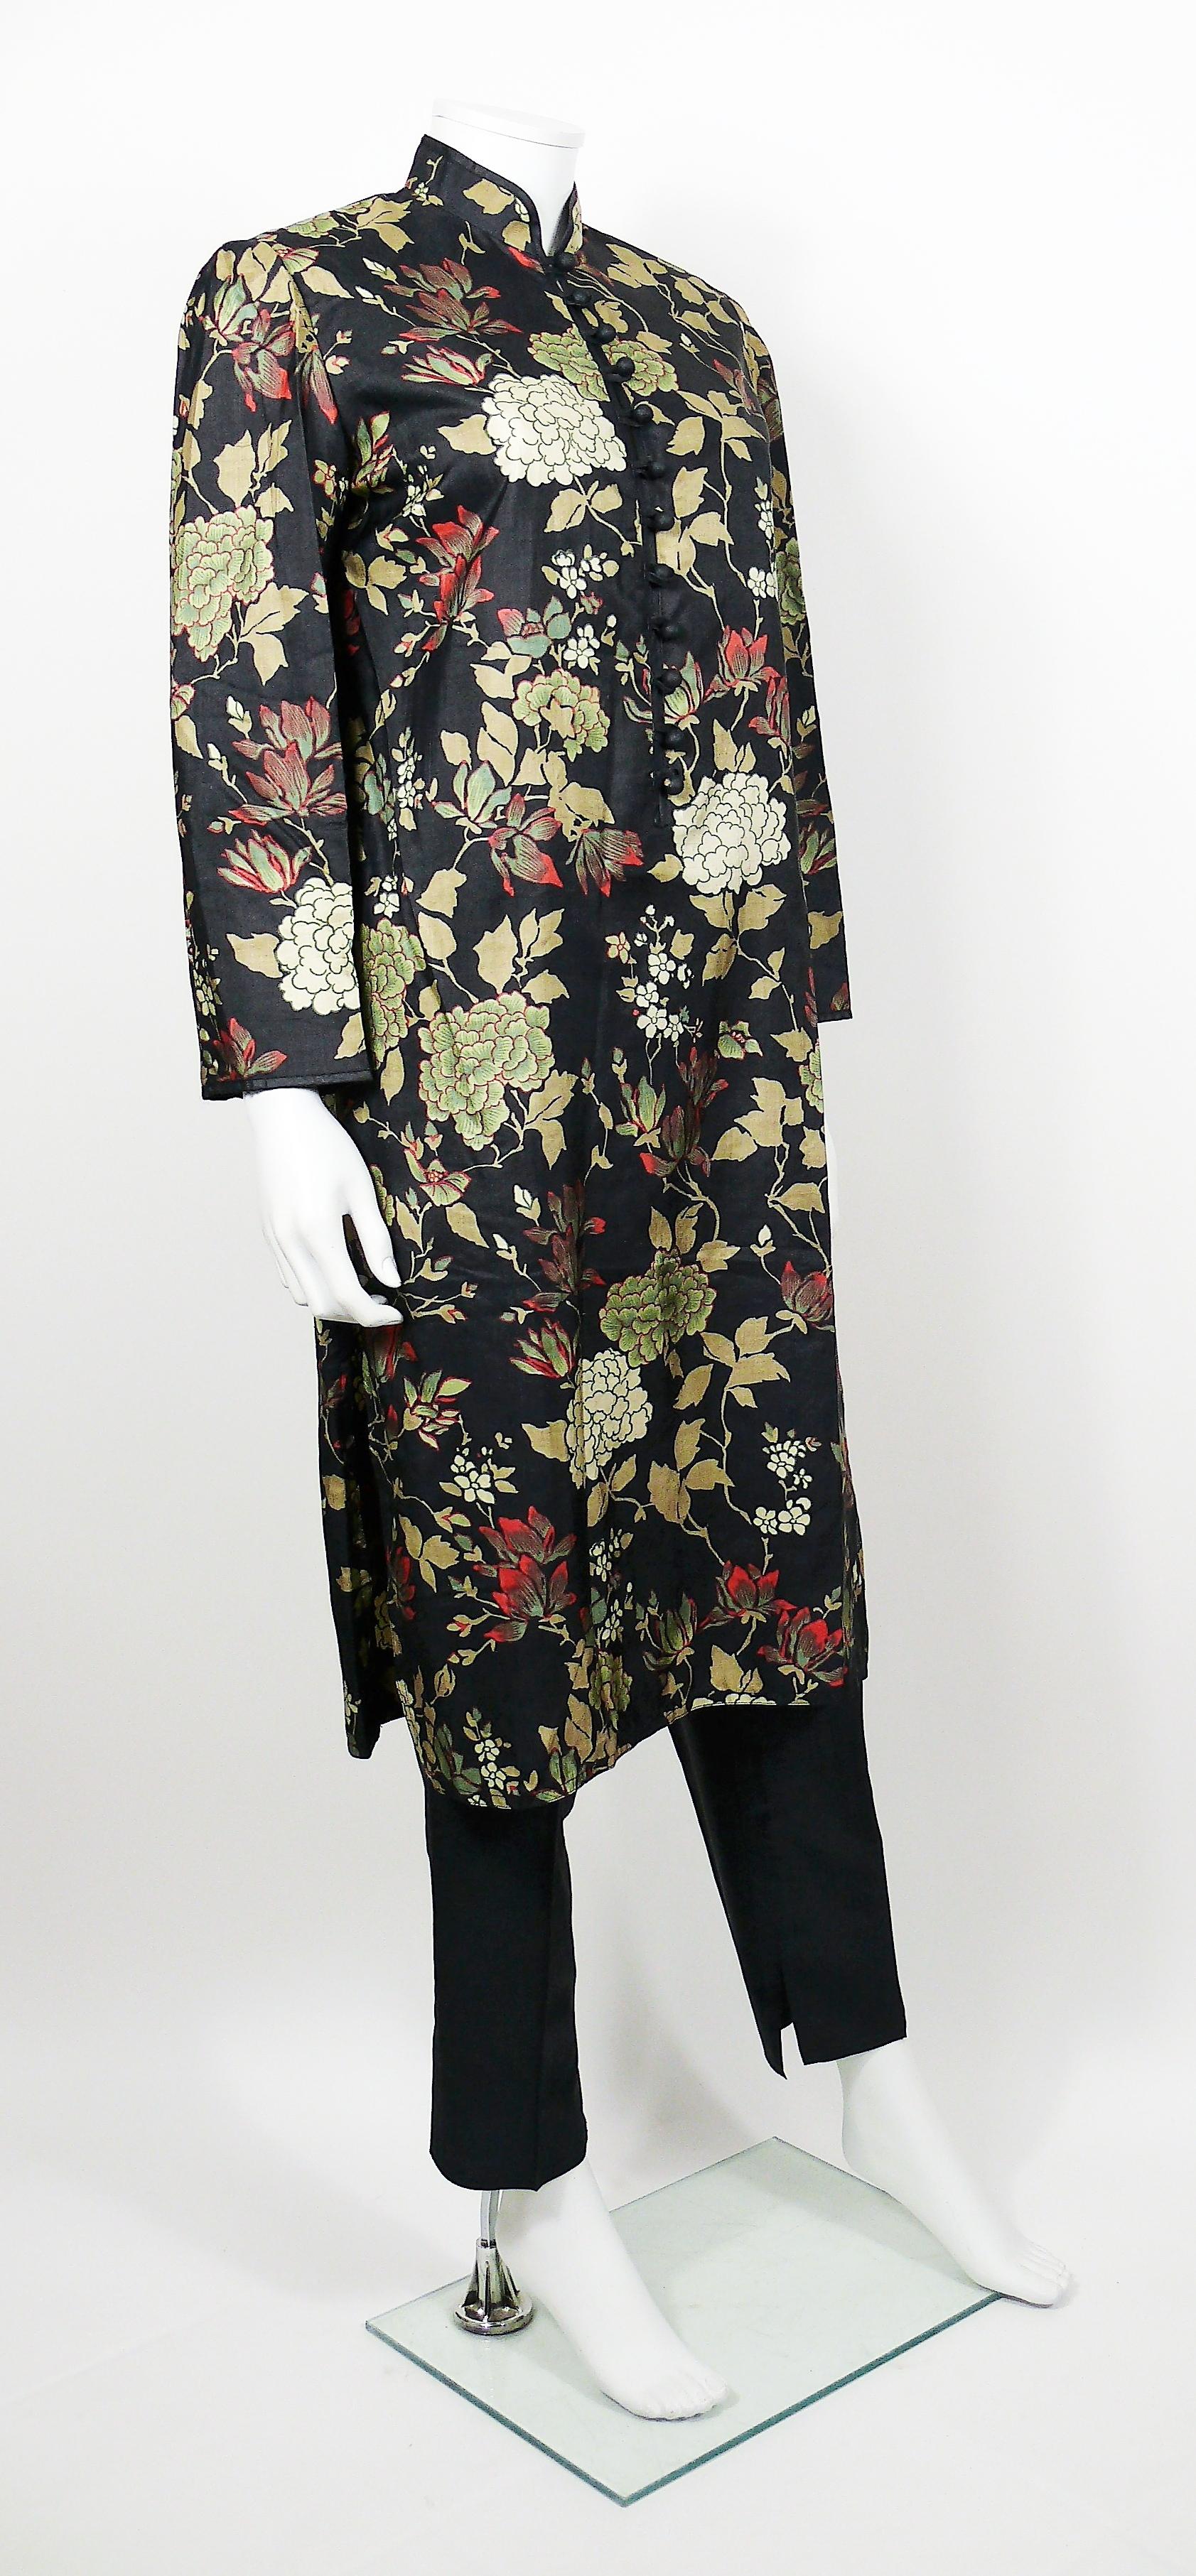 LUIS MARI vintage 1970s gorgeous Chinese inspired ensemble including a floral print long tunic and black trousers.

TUNIC features :
- Multicolored floral design on a black background.
- Mandarin collar.
- Front buttoning.
- Long sleeves.
- Side